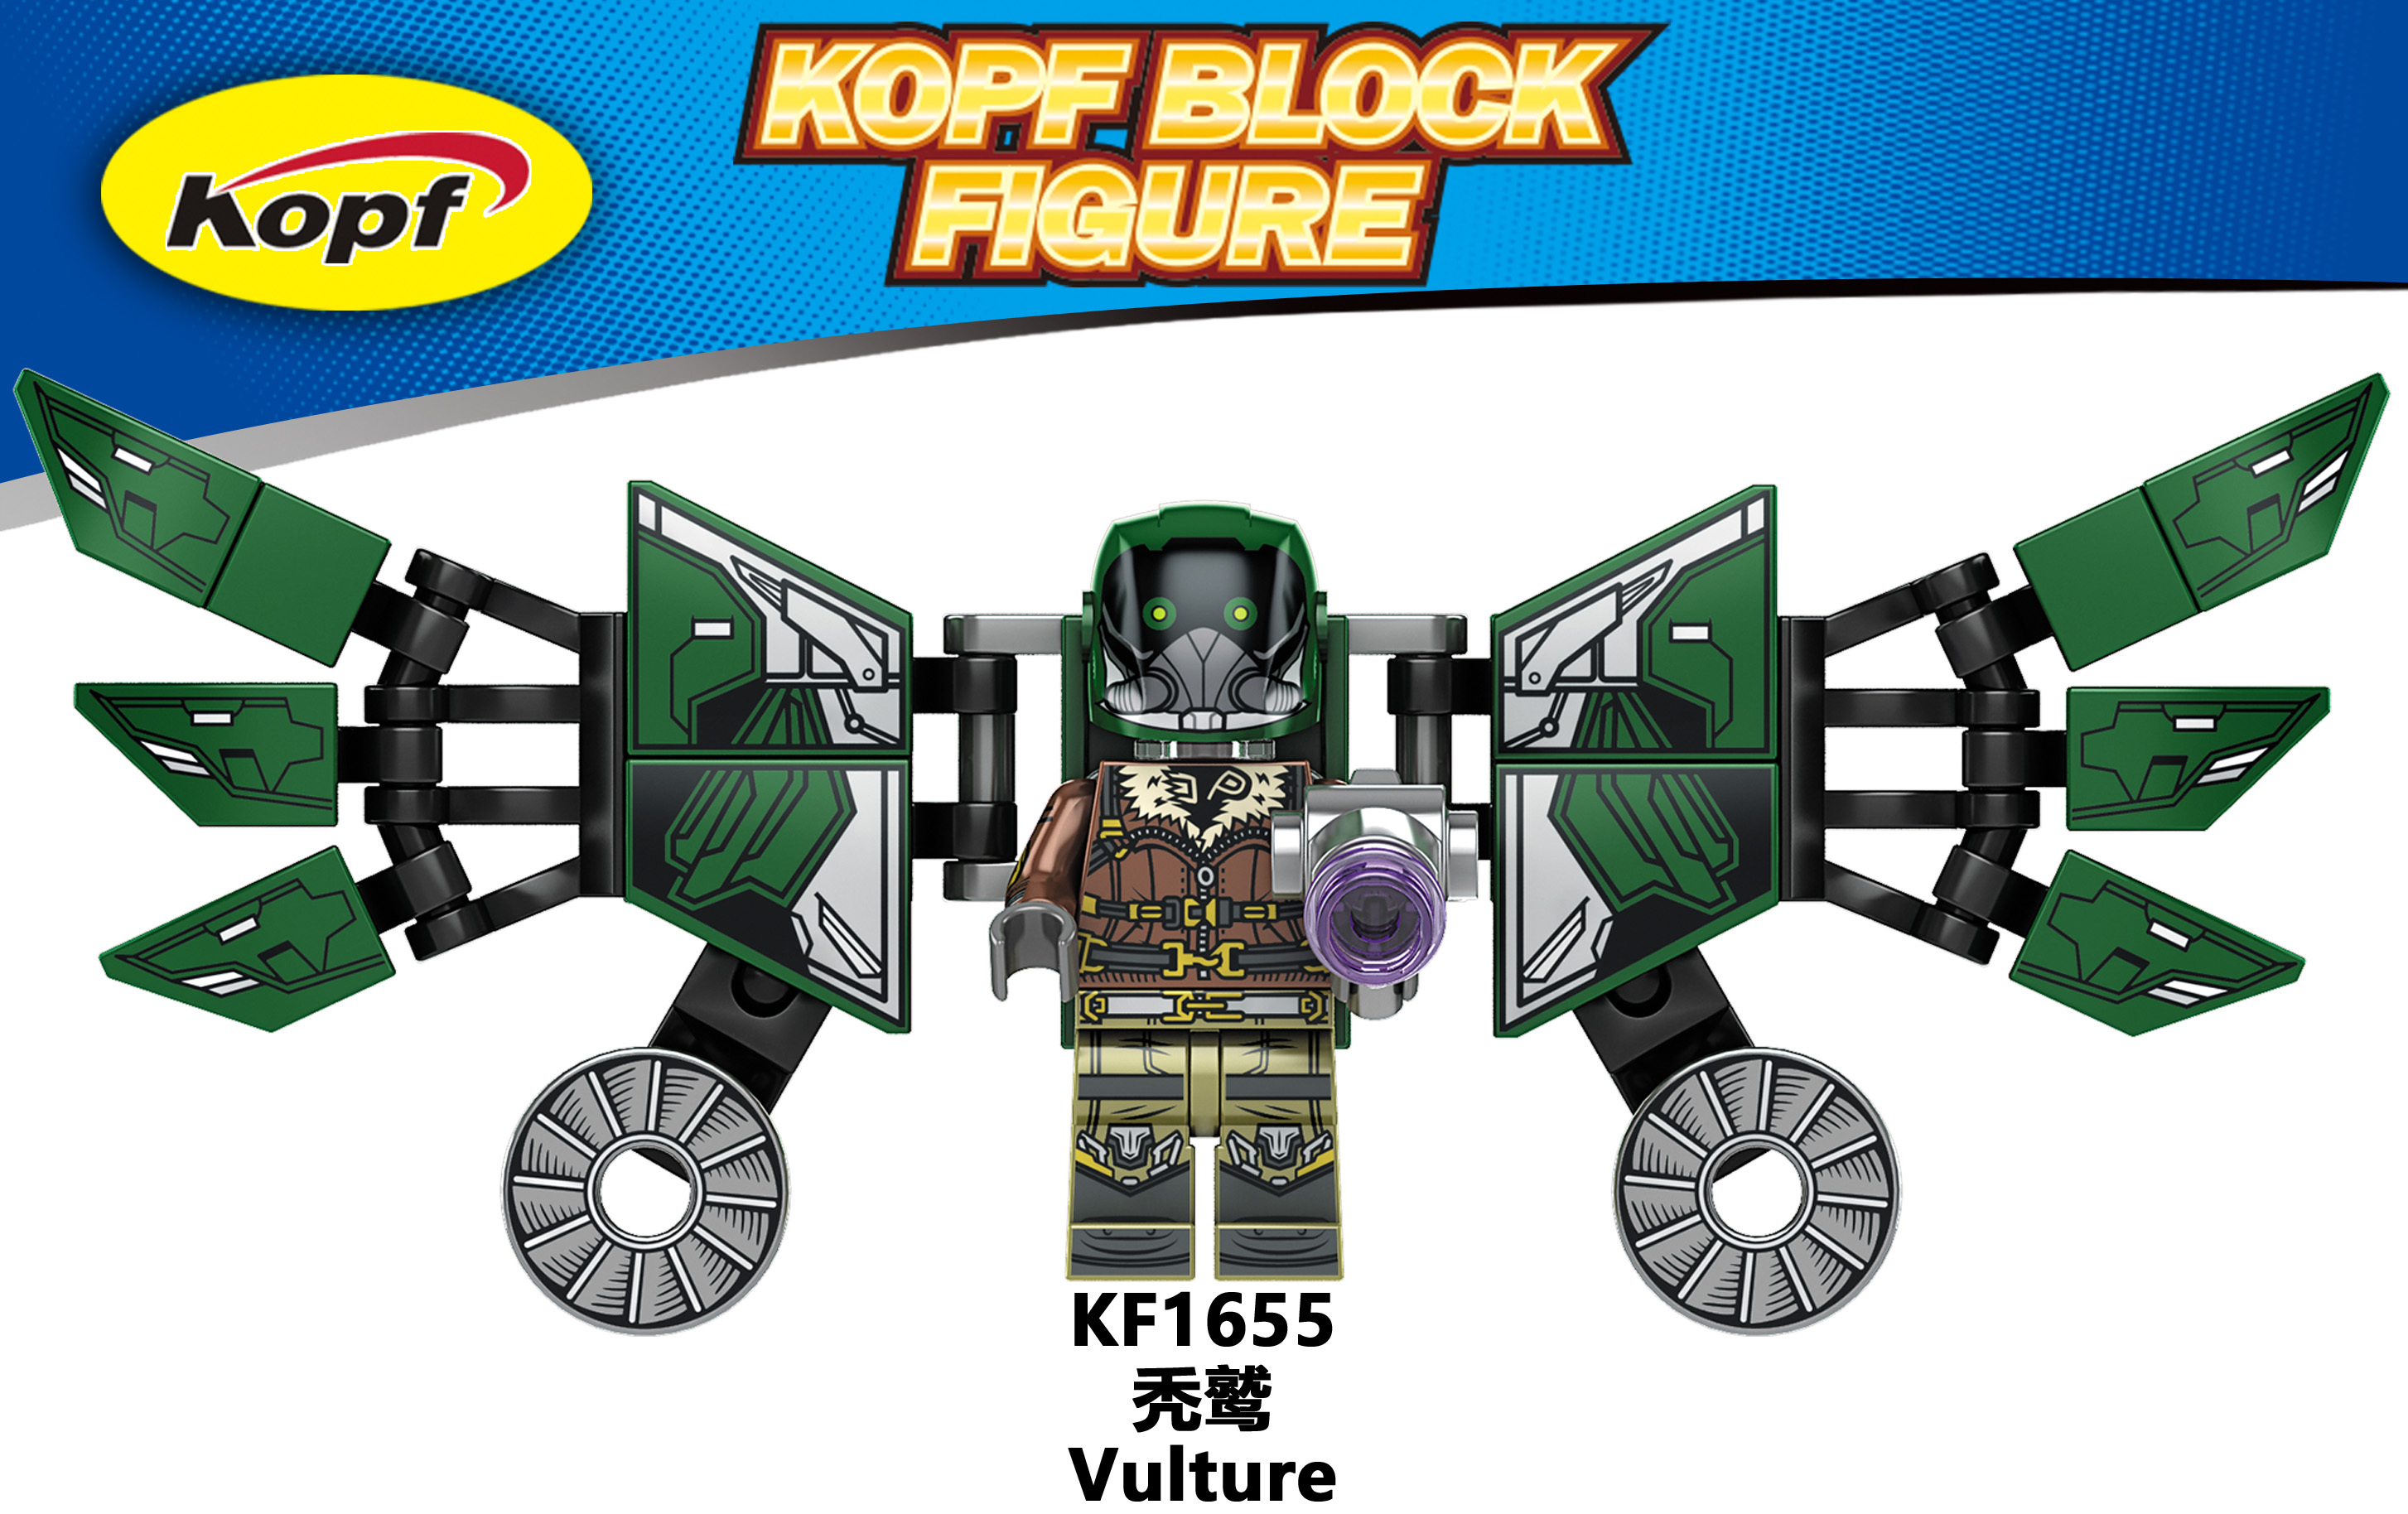 KF1649 KF1650 KF1651 KF1652 KF1653 KF1654 KF1655 KF1656 KF6154 Building Blocks Bricks Spiderman Scorpion Vulture Lizard  Electro  gREENMovie Series Action Educational Toys for Kids Gifts 